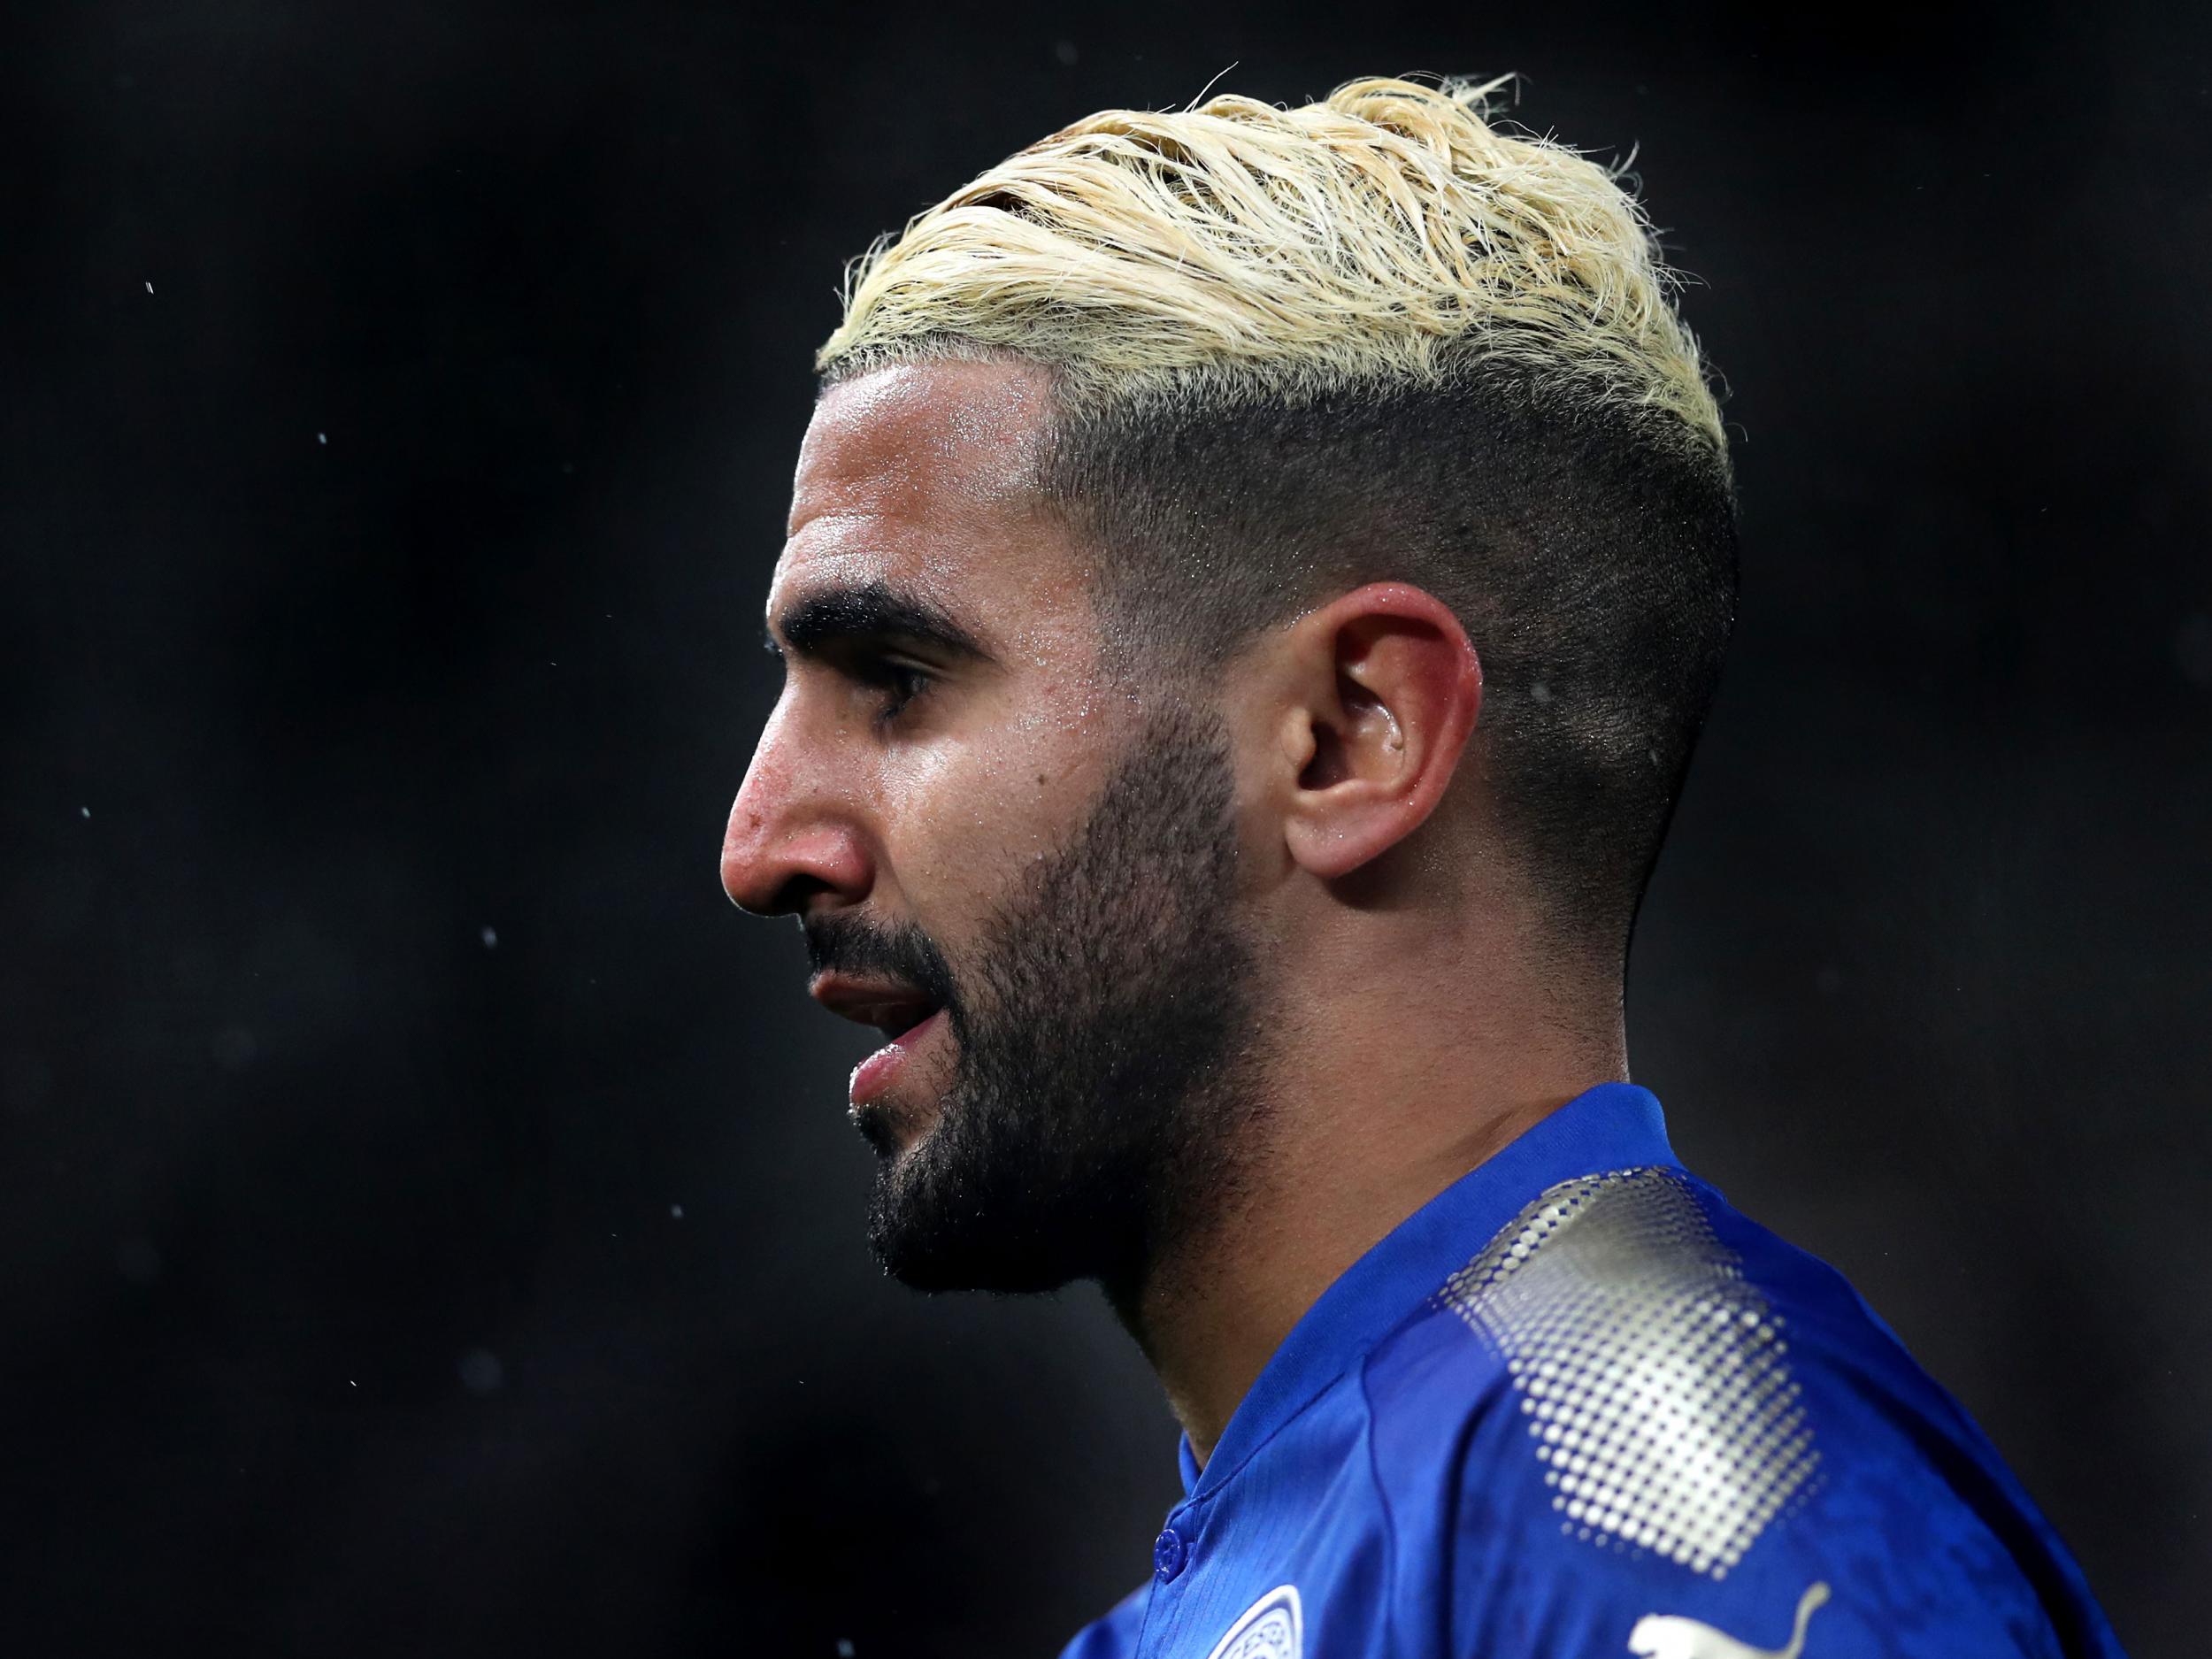 Leicester playmaker Riyad Mahrez handed in a transfer request on Tuesday